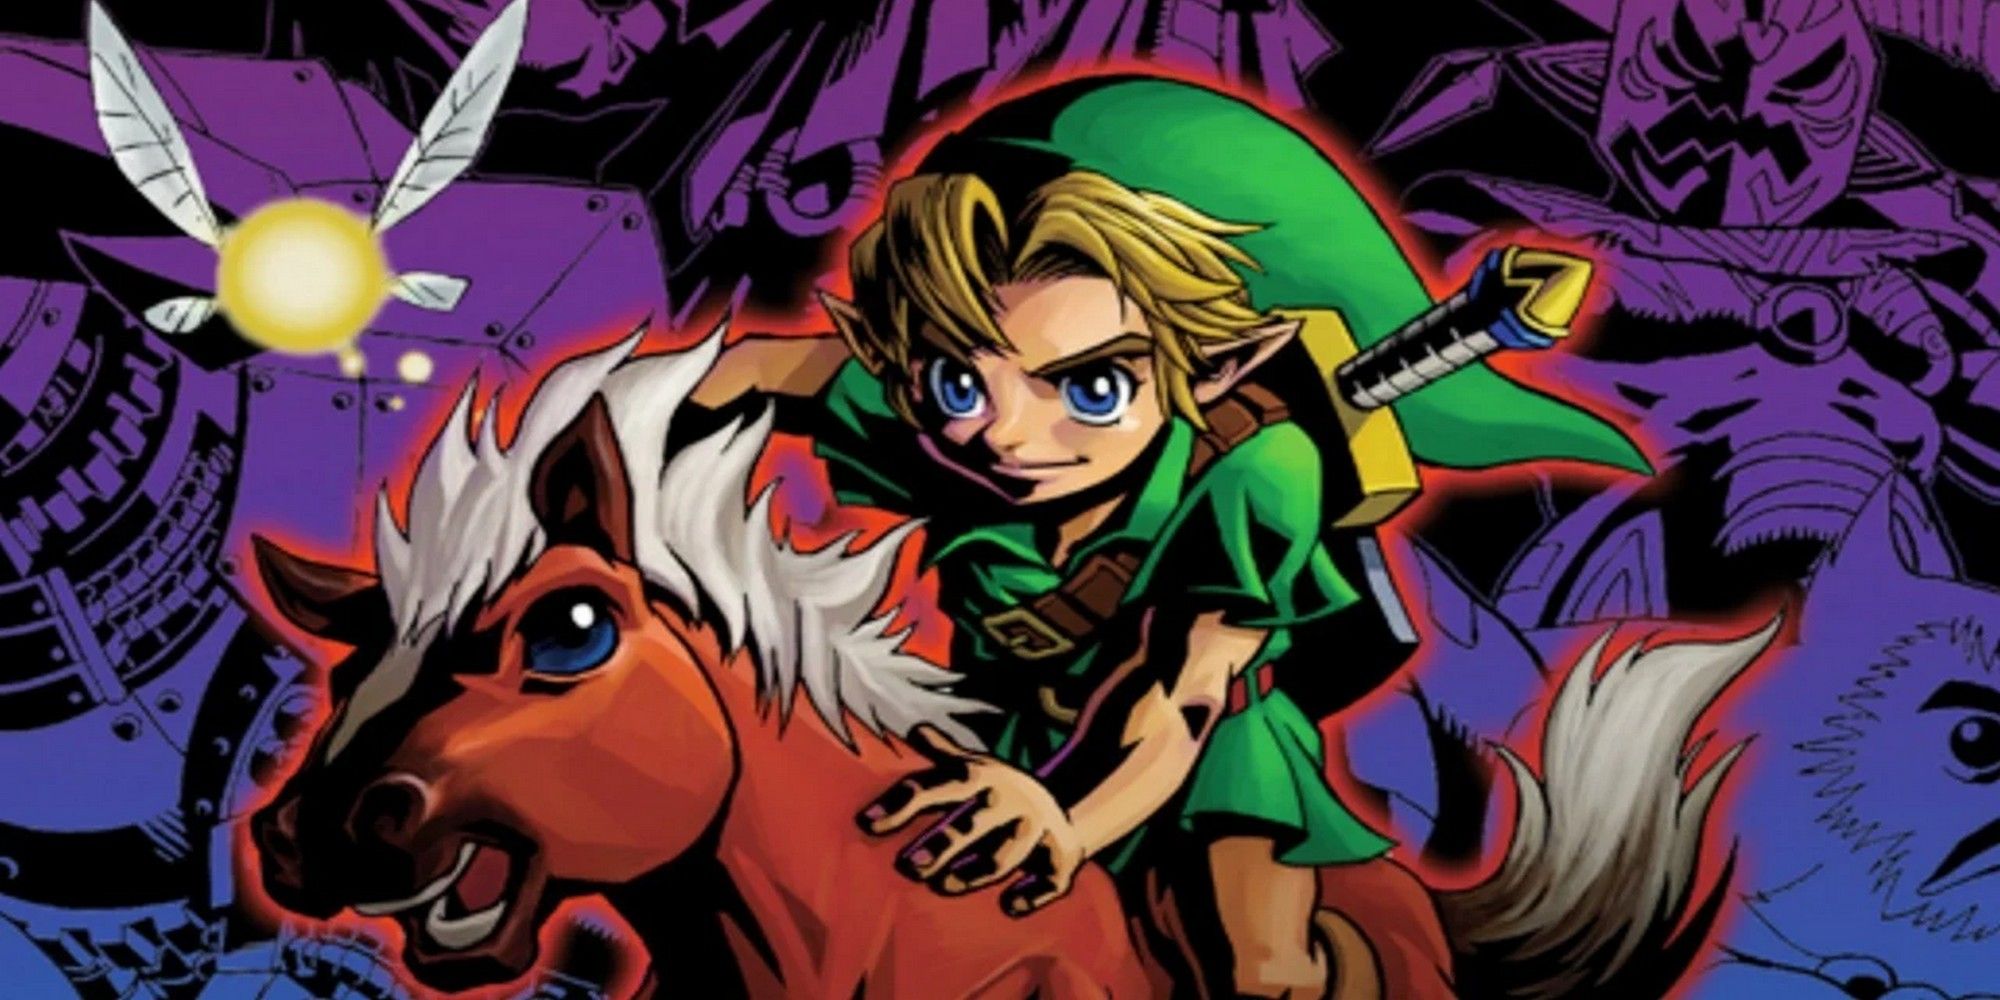 child link riding epona with tatl from majoras mask